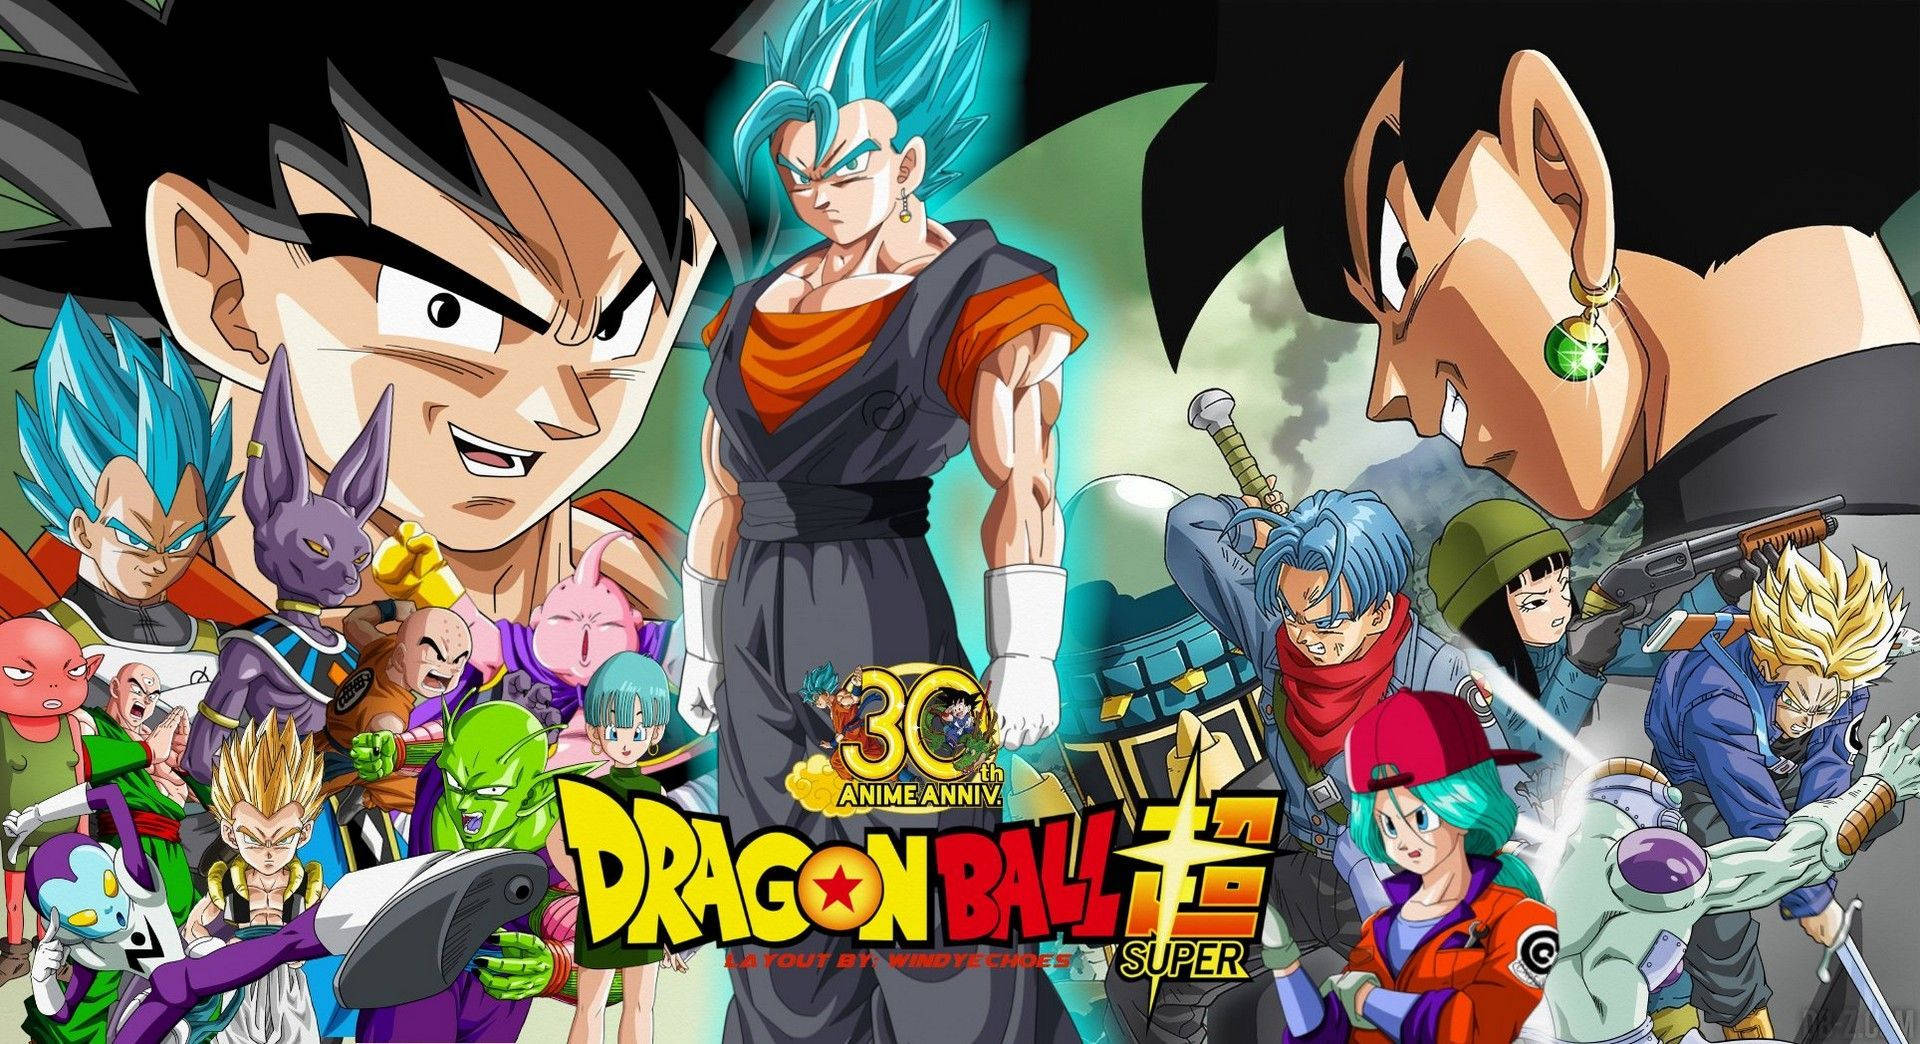 Celebrate the new Dragon Ball Super characters Wallpaper